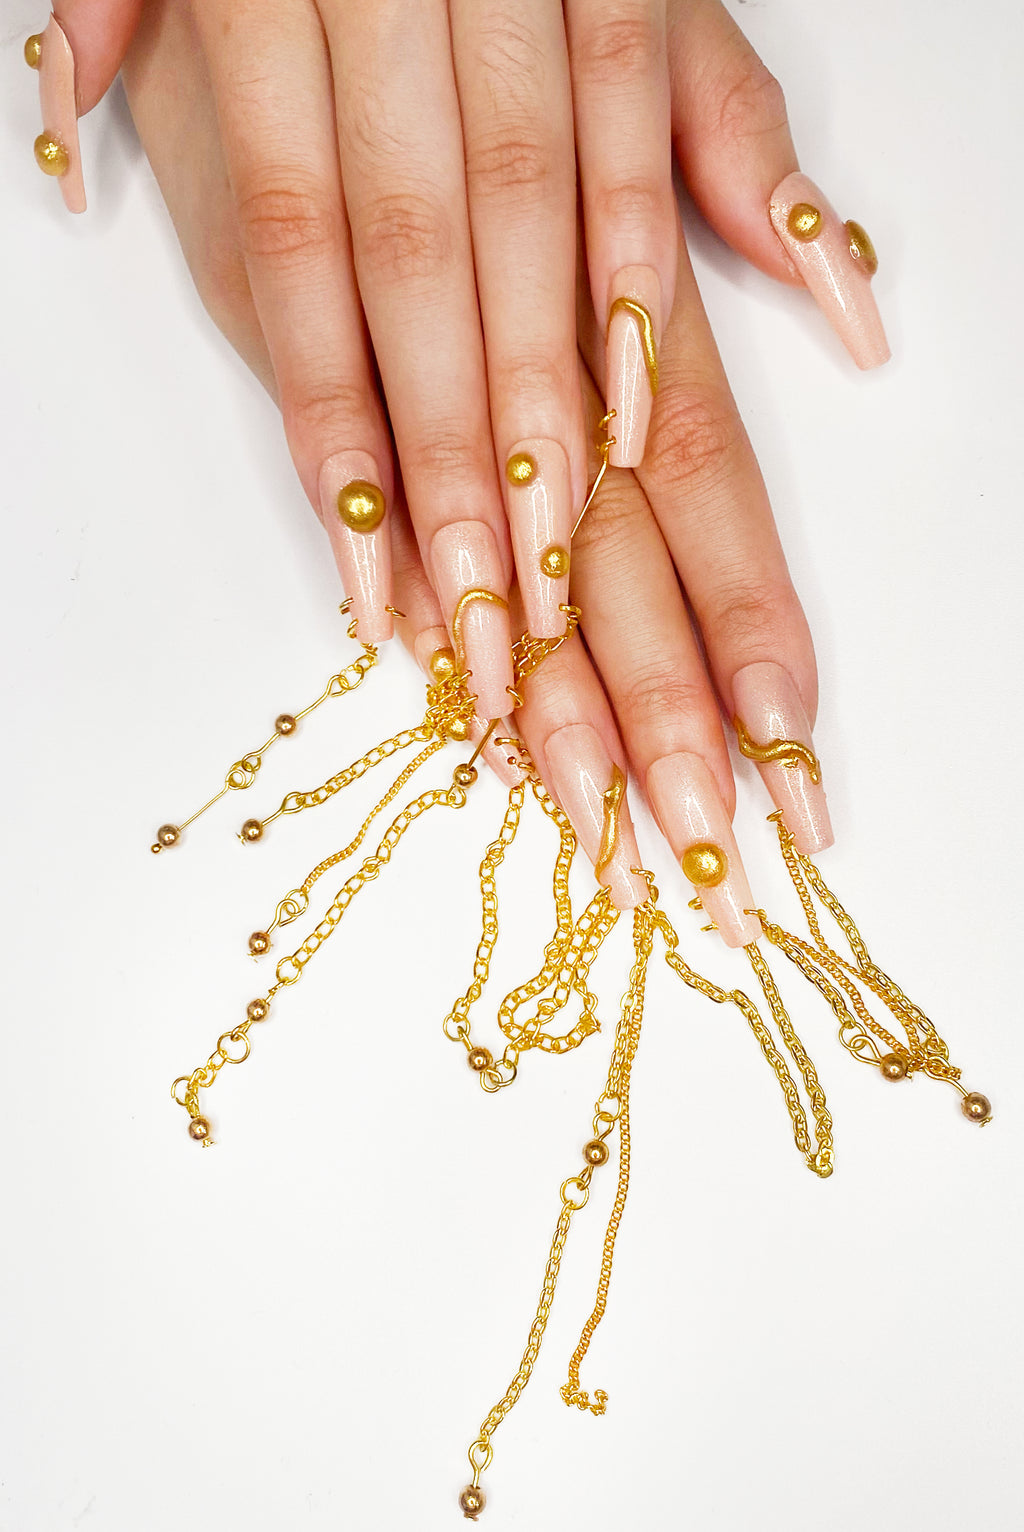 Golden Chain Droplets Nails